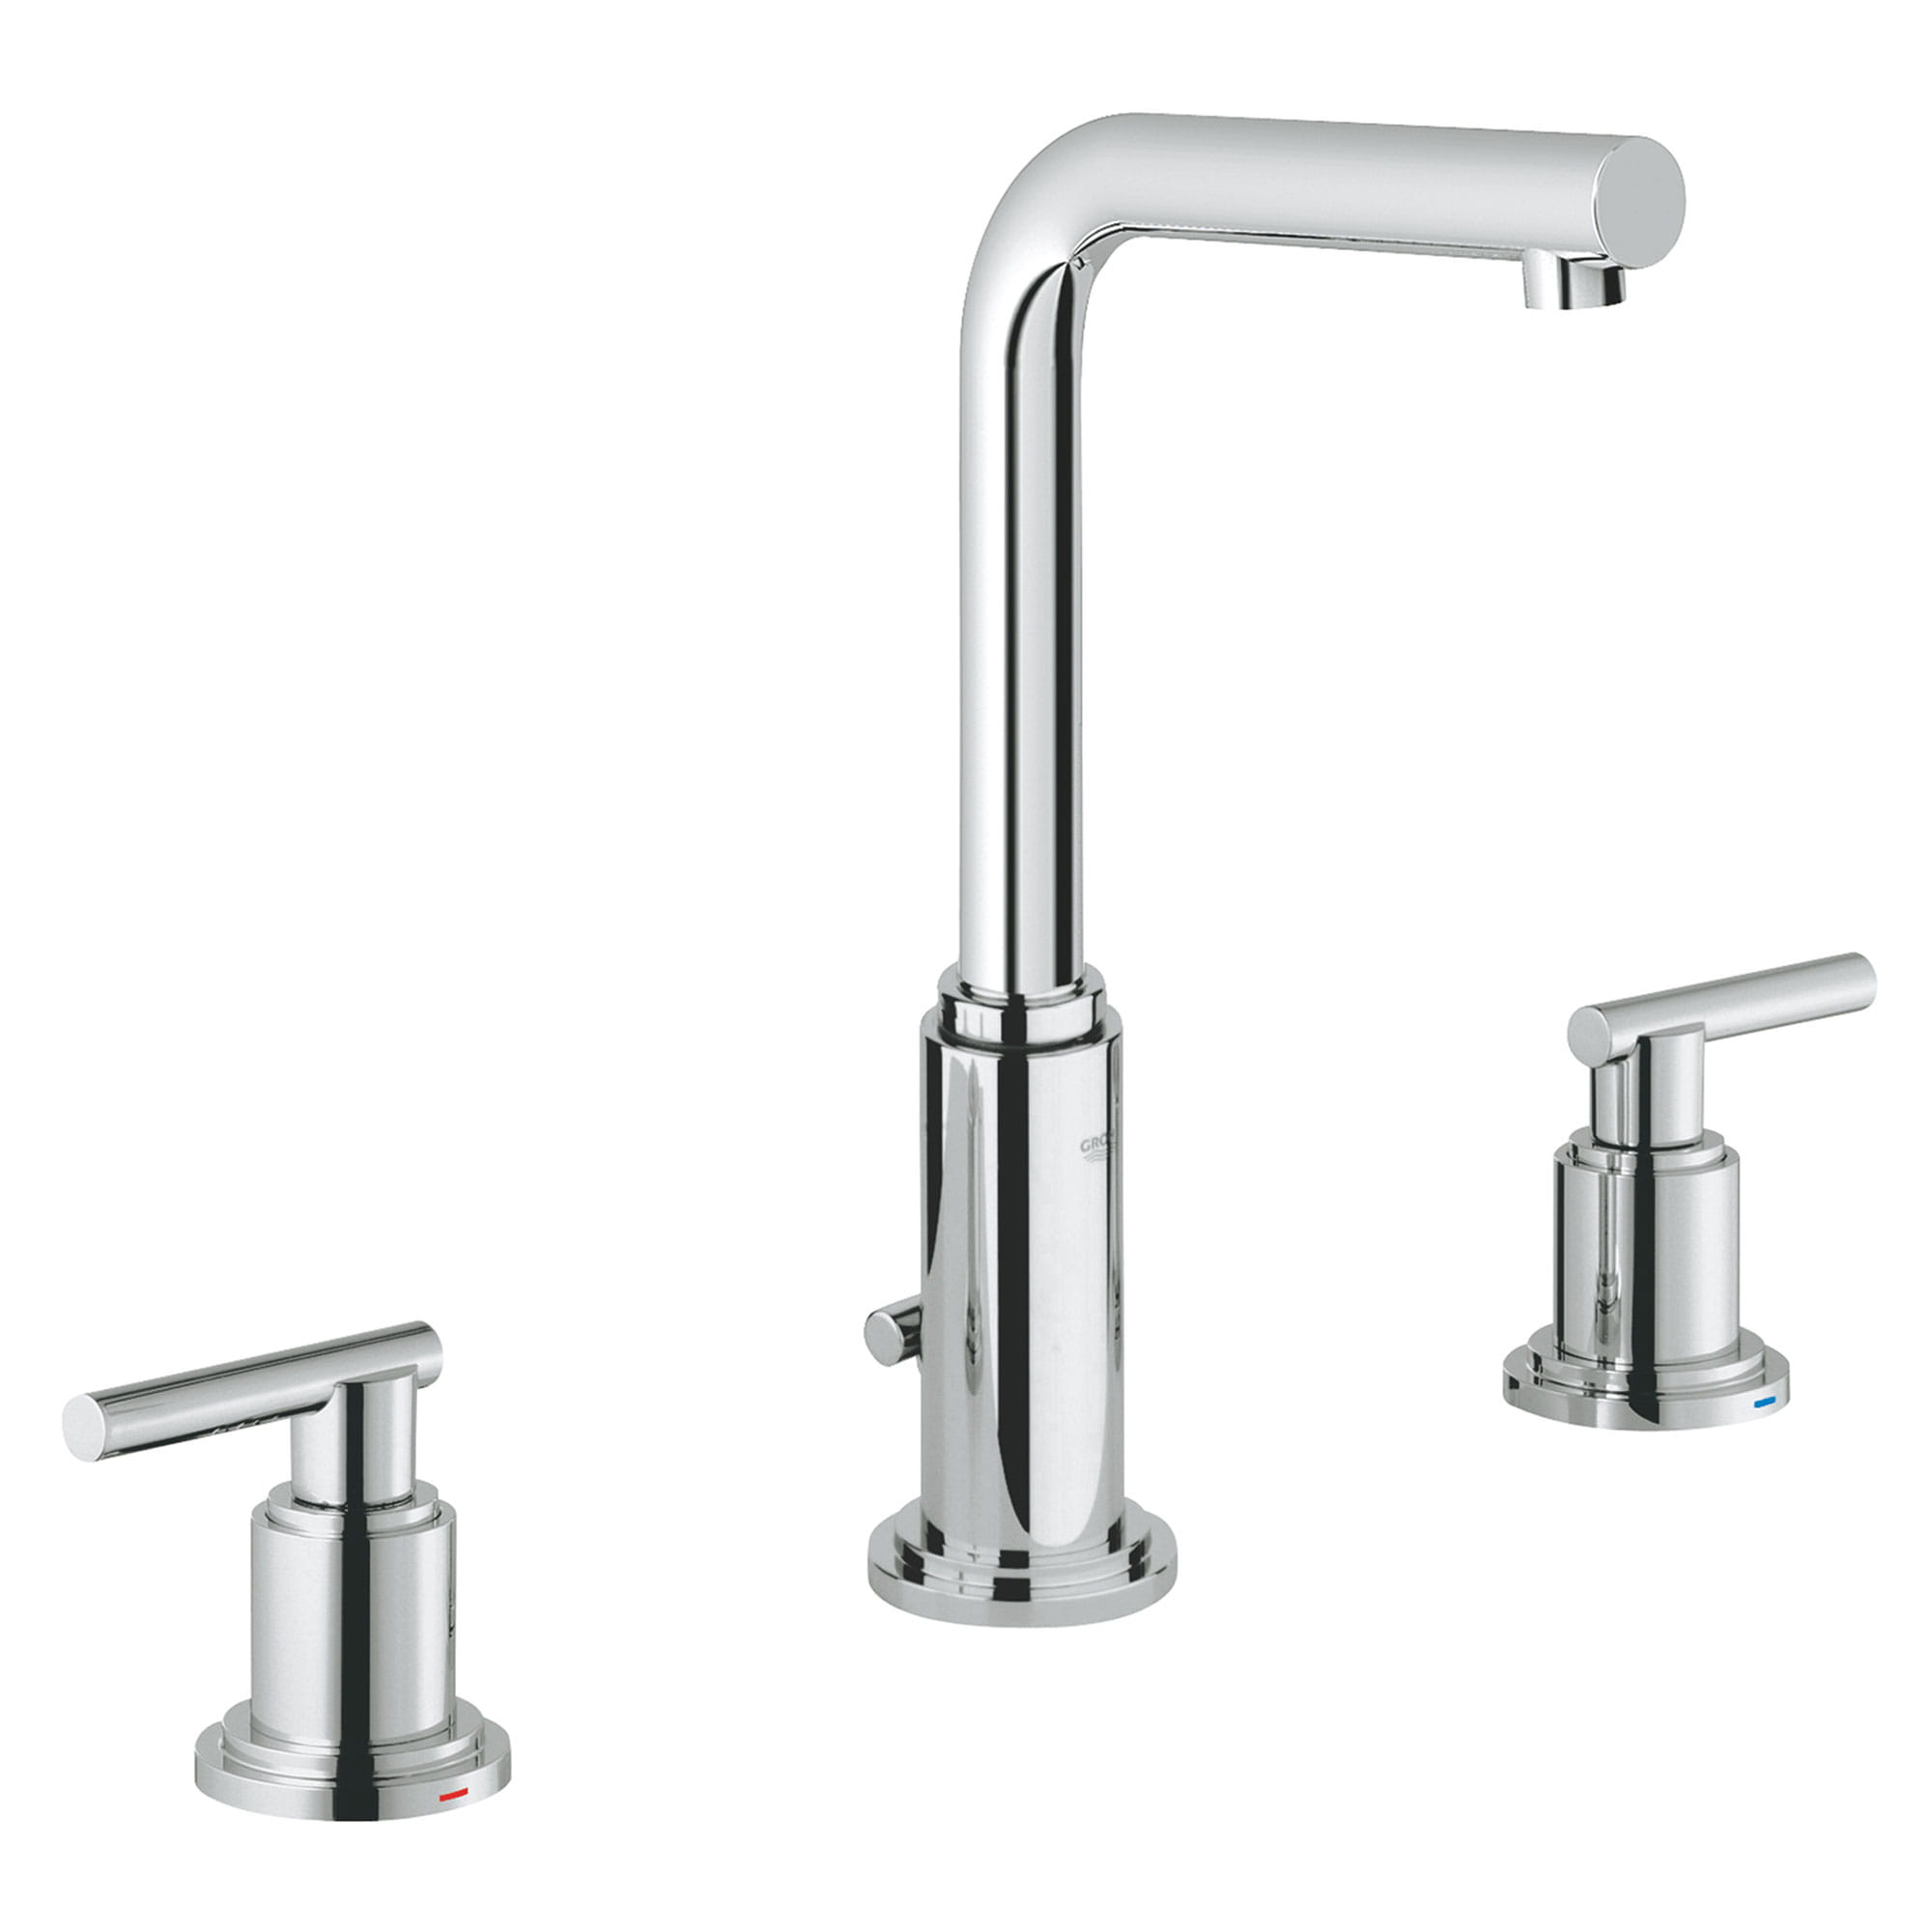 8-INCH WIDESPREAD 2-HANDLE L-SIZE BATHROOM FAUCET 1.2 GPM-1